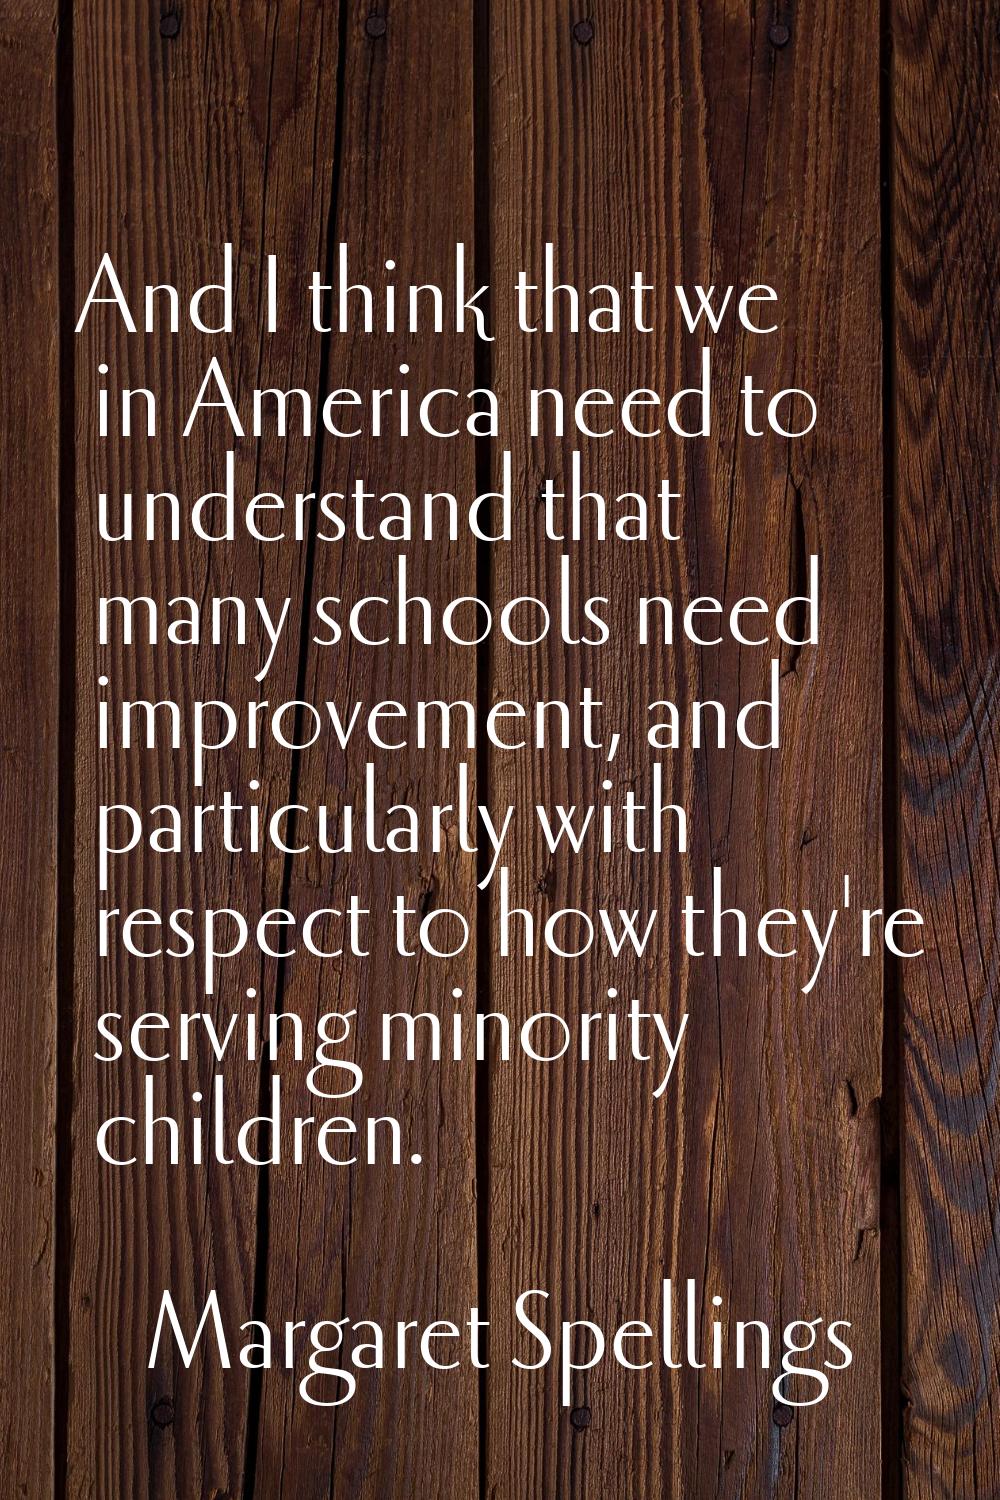 And I think that we in America need to understand that many schools need improvement, and particula